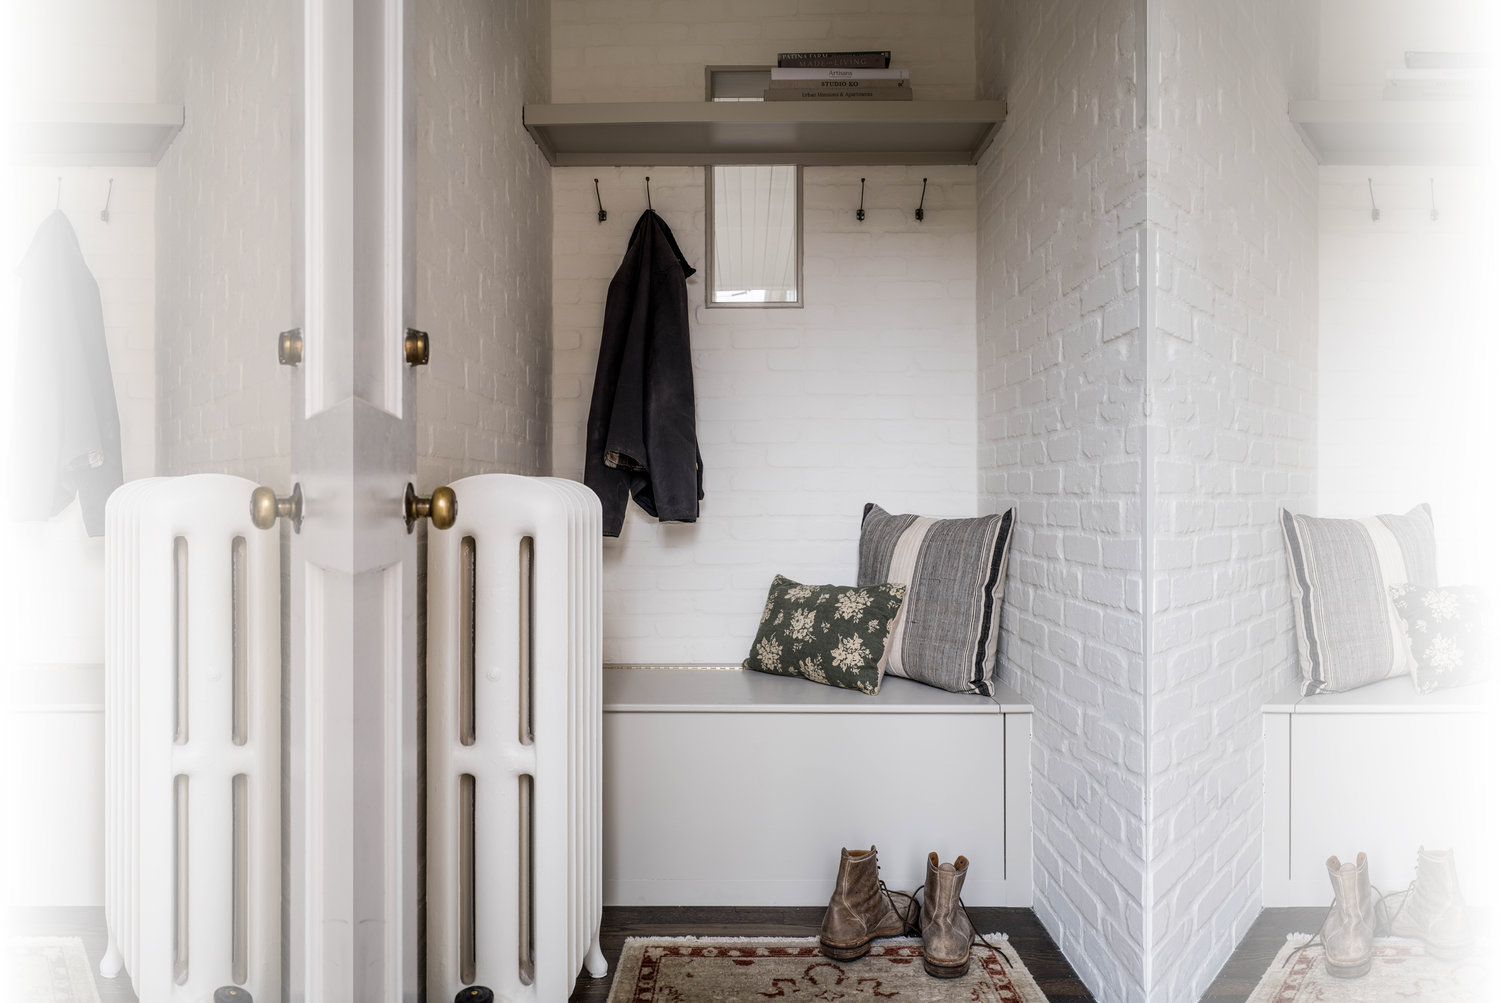 Textiles bring warmth and comfort to the snug mud room